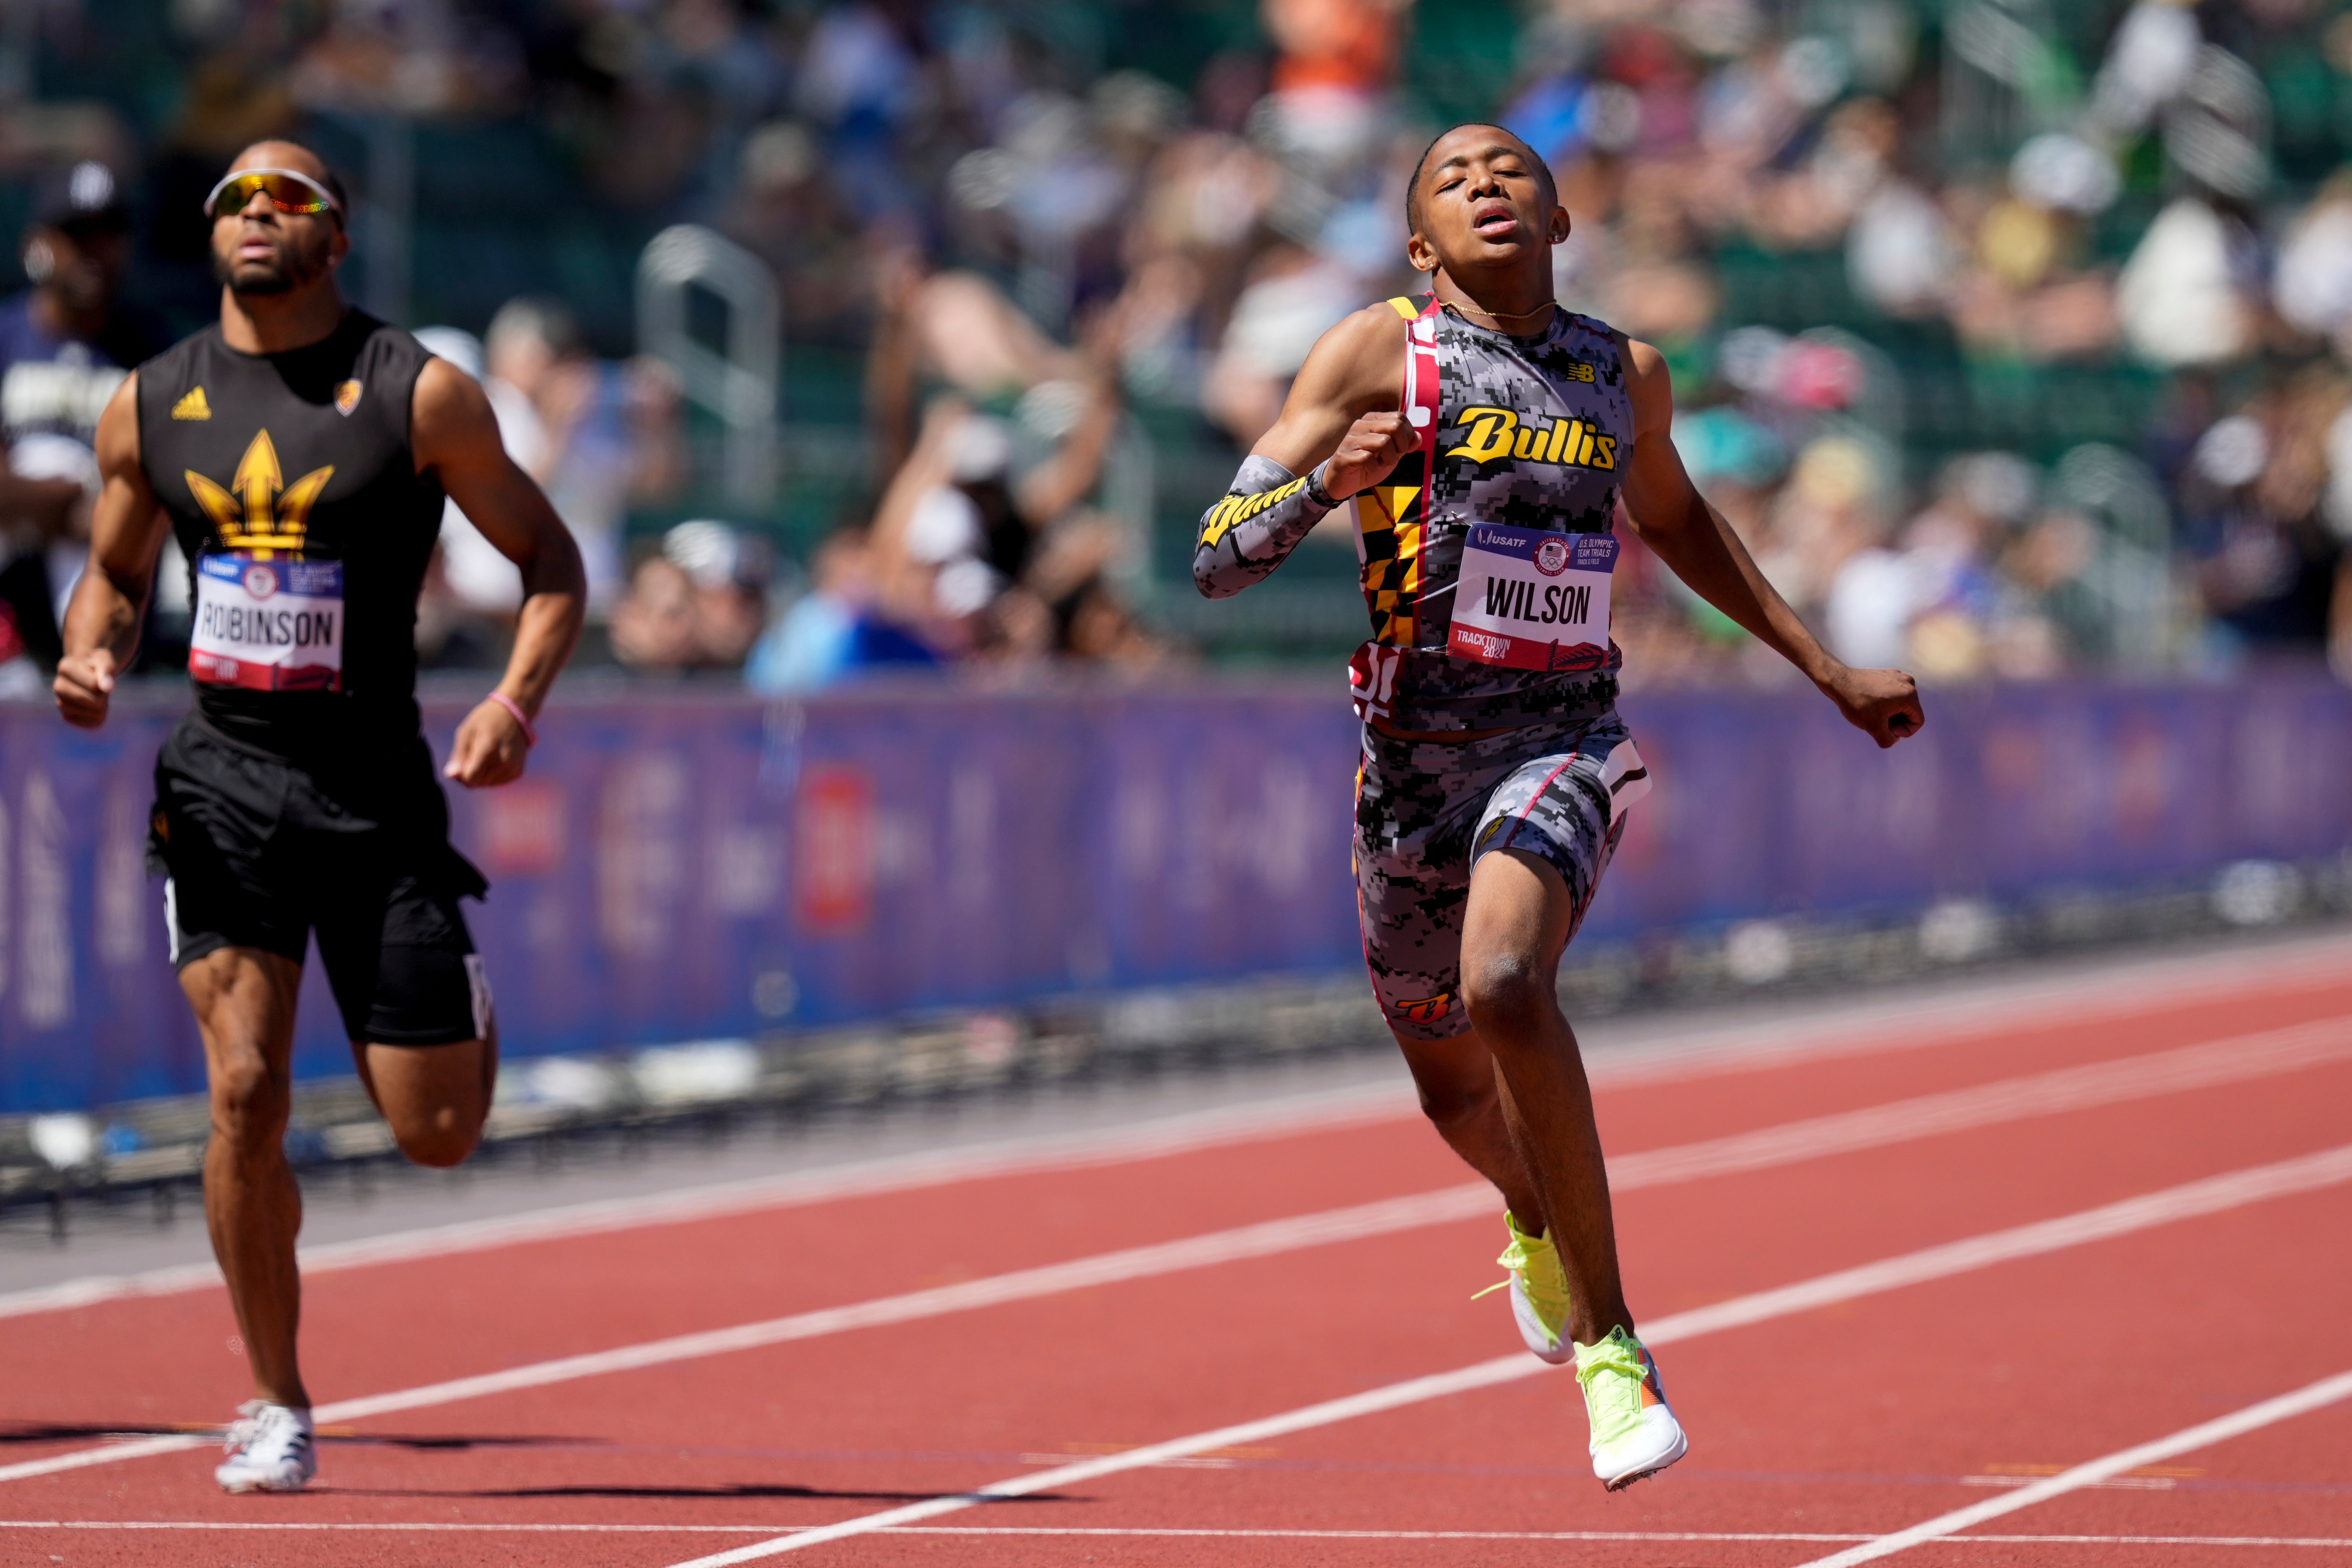 Quincy Wilson wins a 400m heat during the US track and field Olympic team trials on June 21